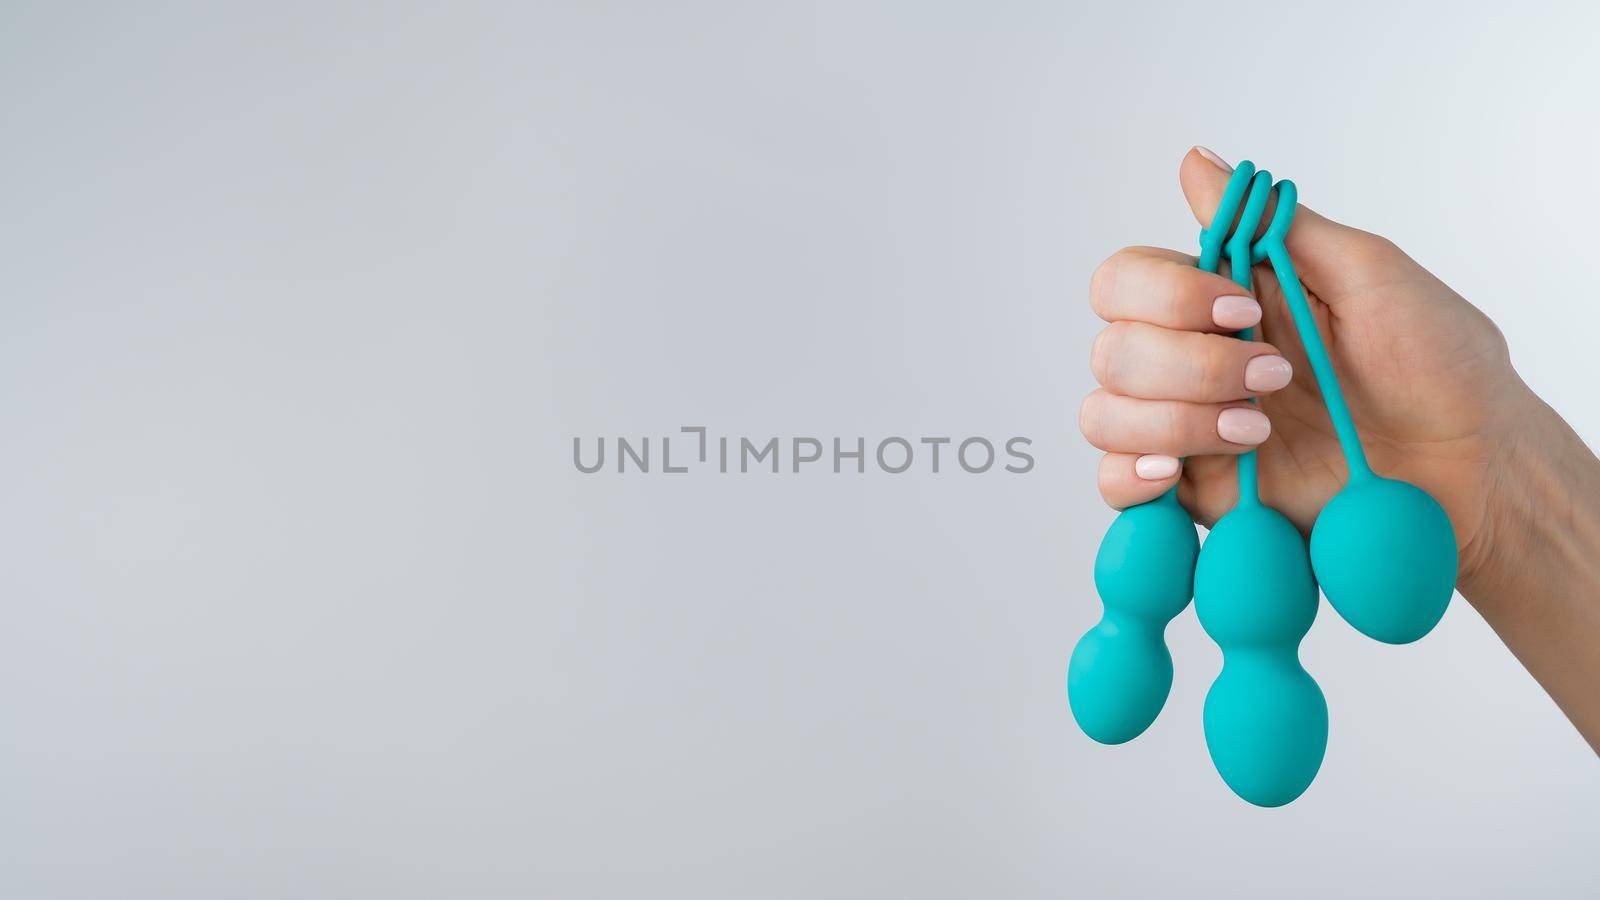 A faceless woman demonstrates a set of mint-colored vaginal balls. Girl holding a kegel trainer for training pelvic floor muscles on a white background. by mrwed54